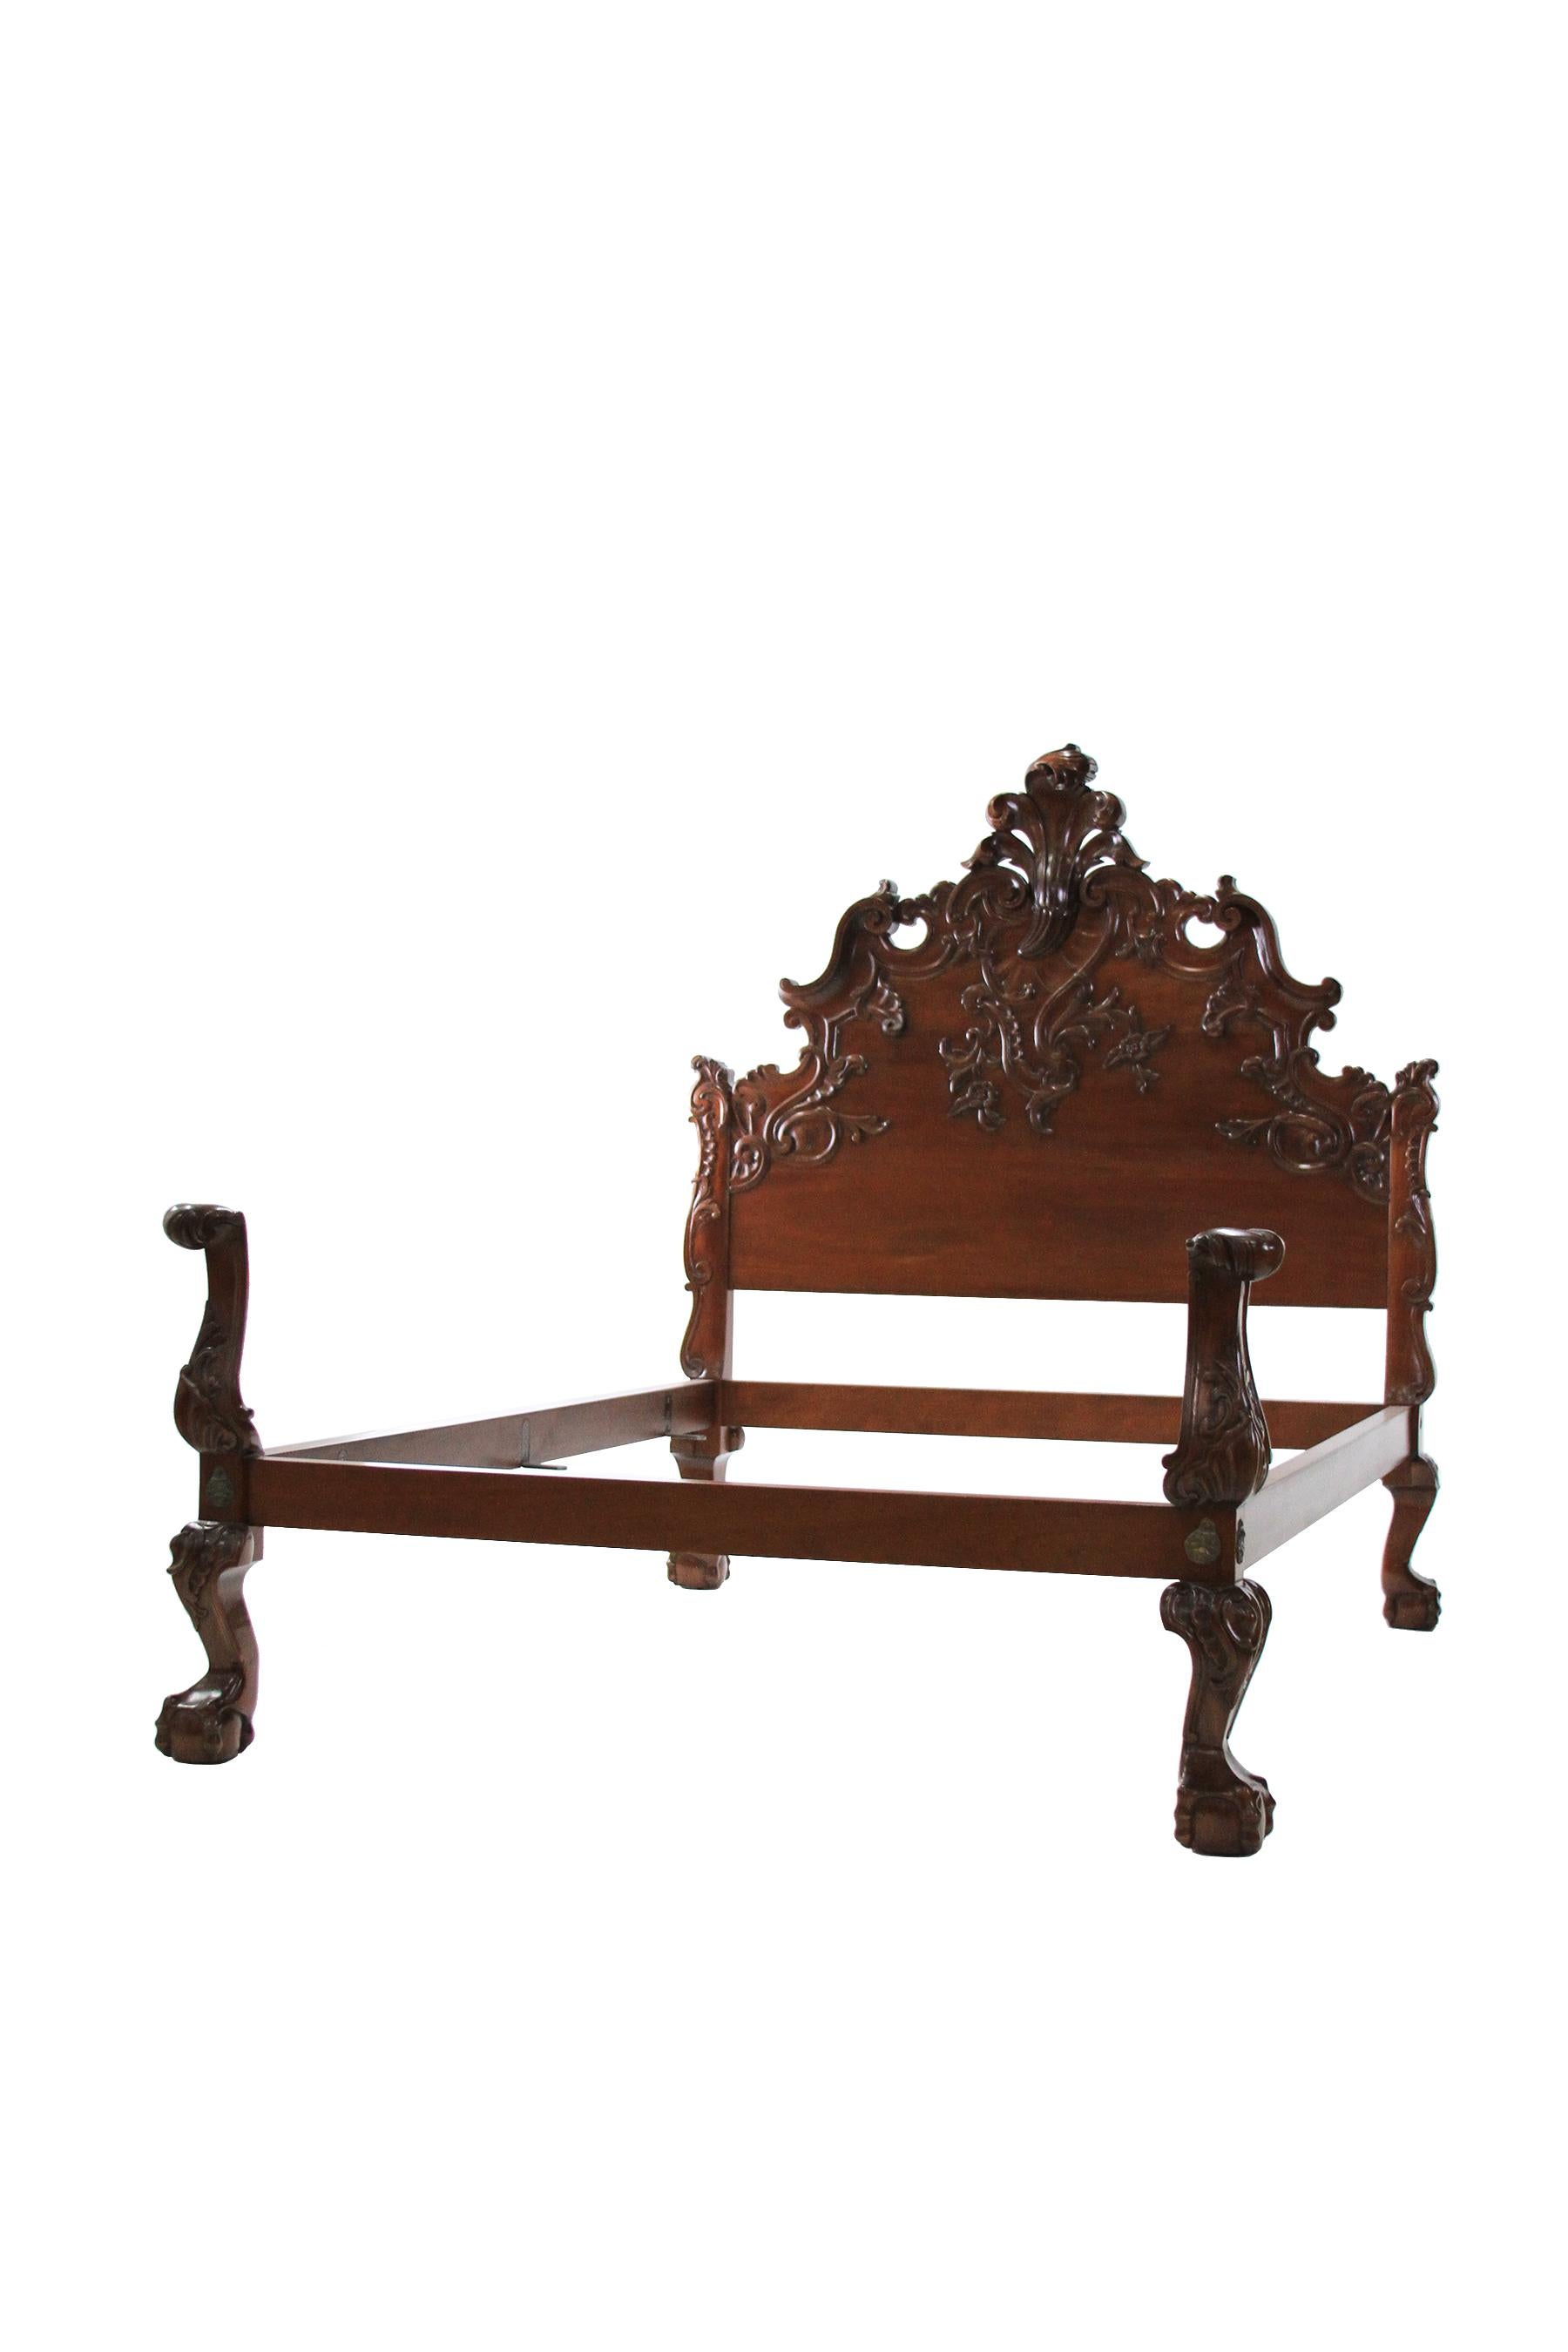 This limited edition Queen Sized Spanish Rococo style bed is hand-carved with a unique asymmetrically flourished headboard, intricately carved in solid Mahogany. This bed is shown in a Queen, there are only two Queens and one King available as a